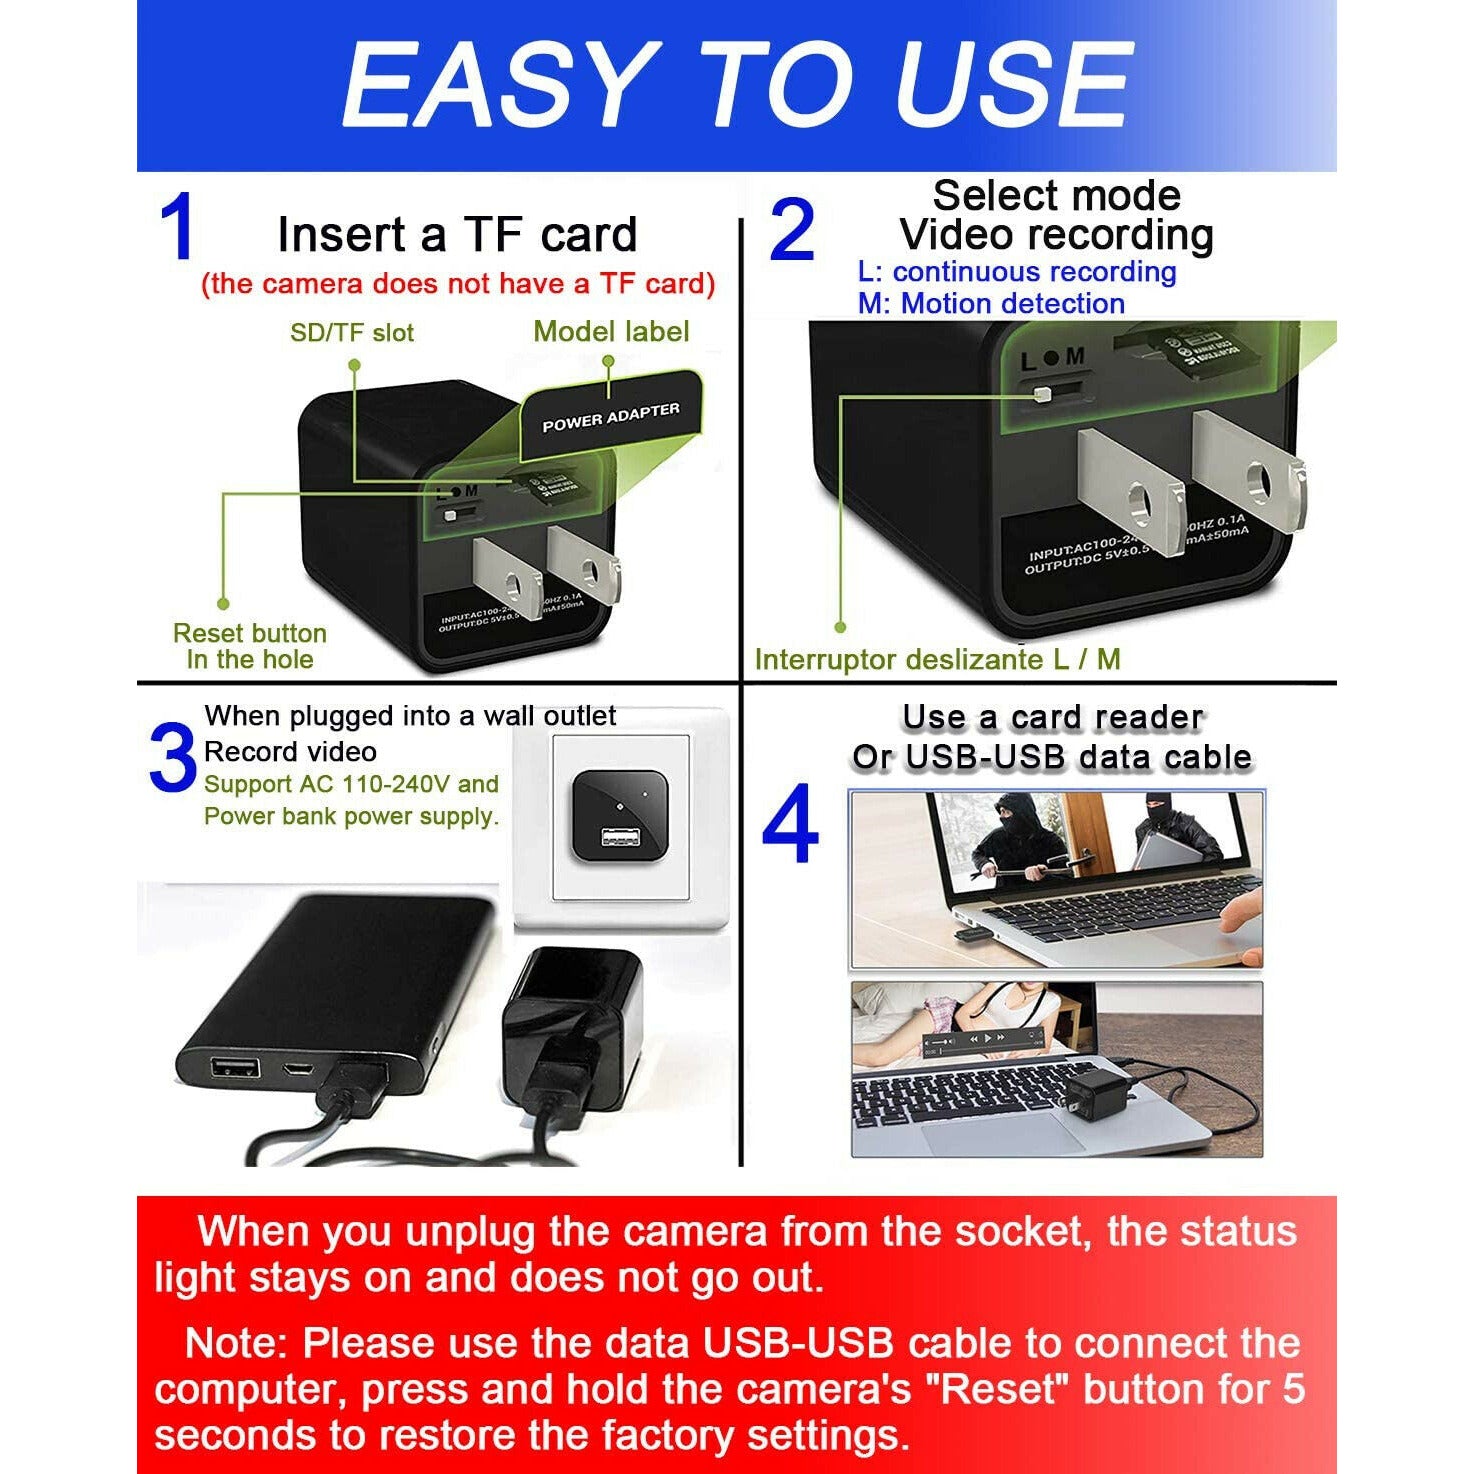 Hidden Camera HD 1080P USB Charger Home Security